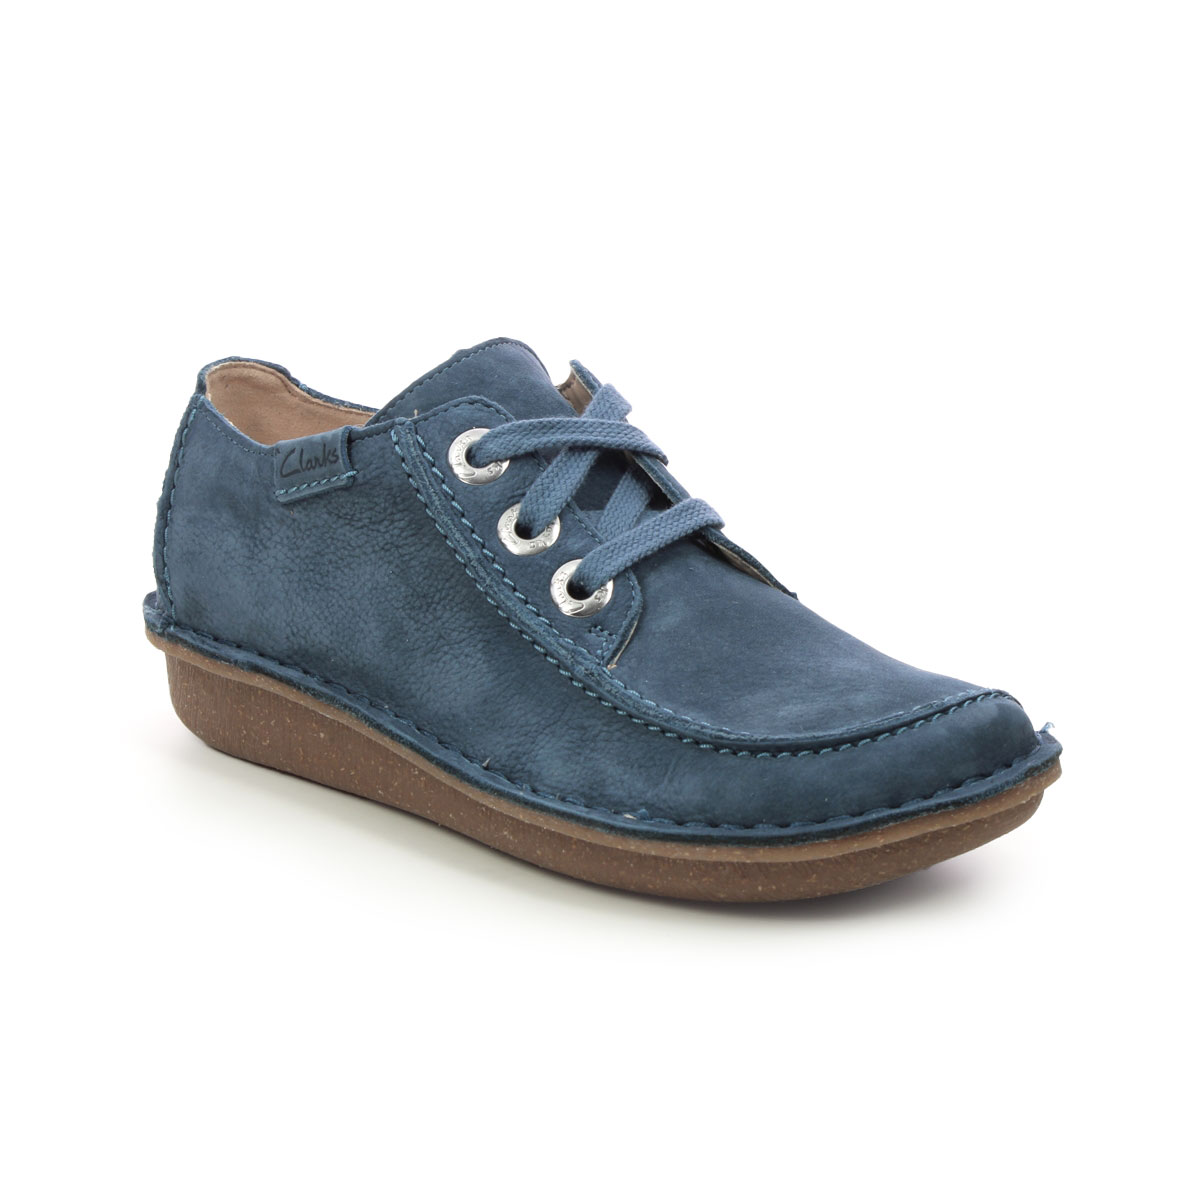 Clarks Funny Dream Blue nubuck Womens lacing shoes 7628-84D in a Plain Leather in Size 3